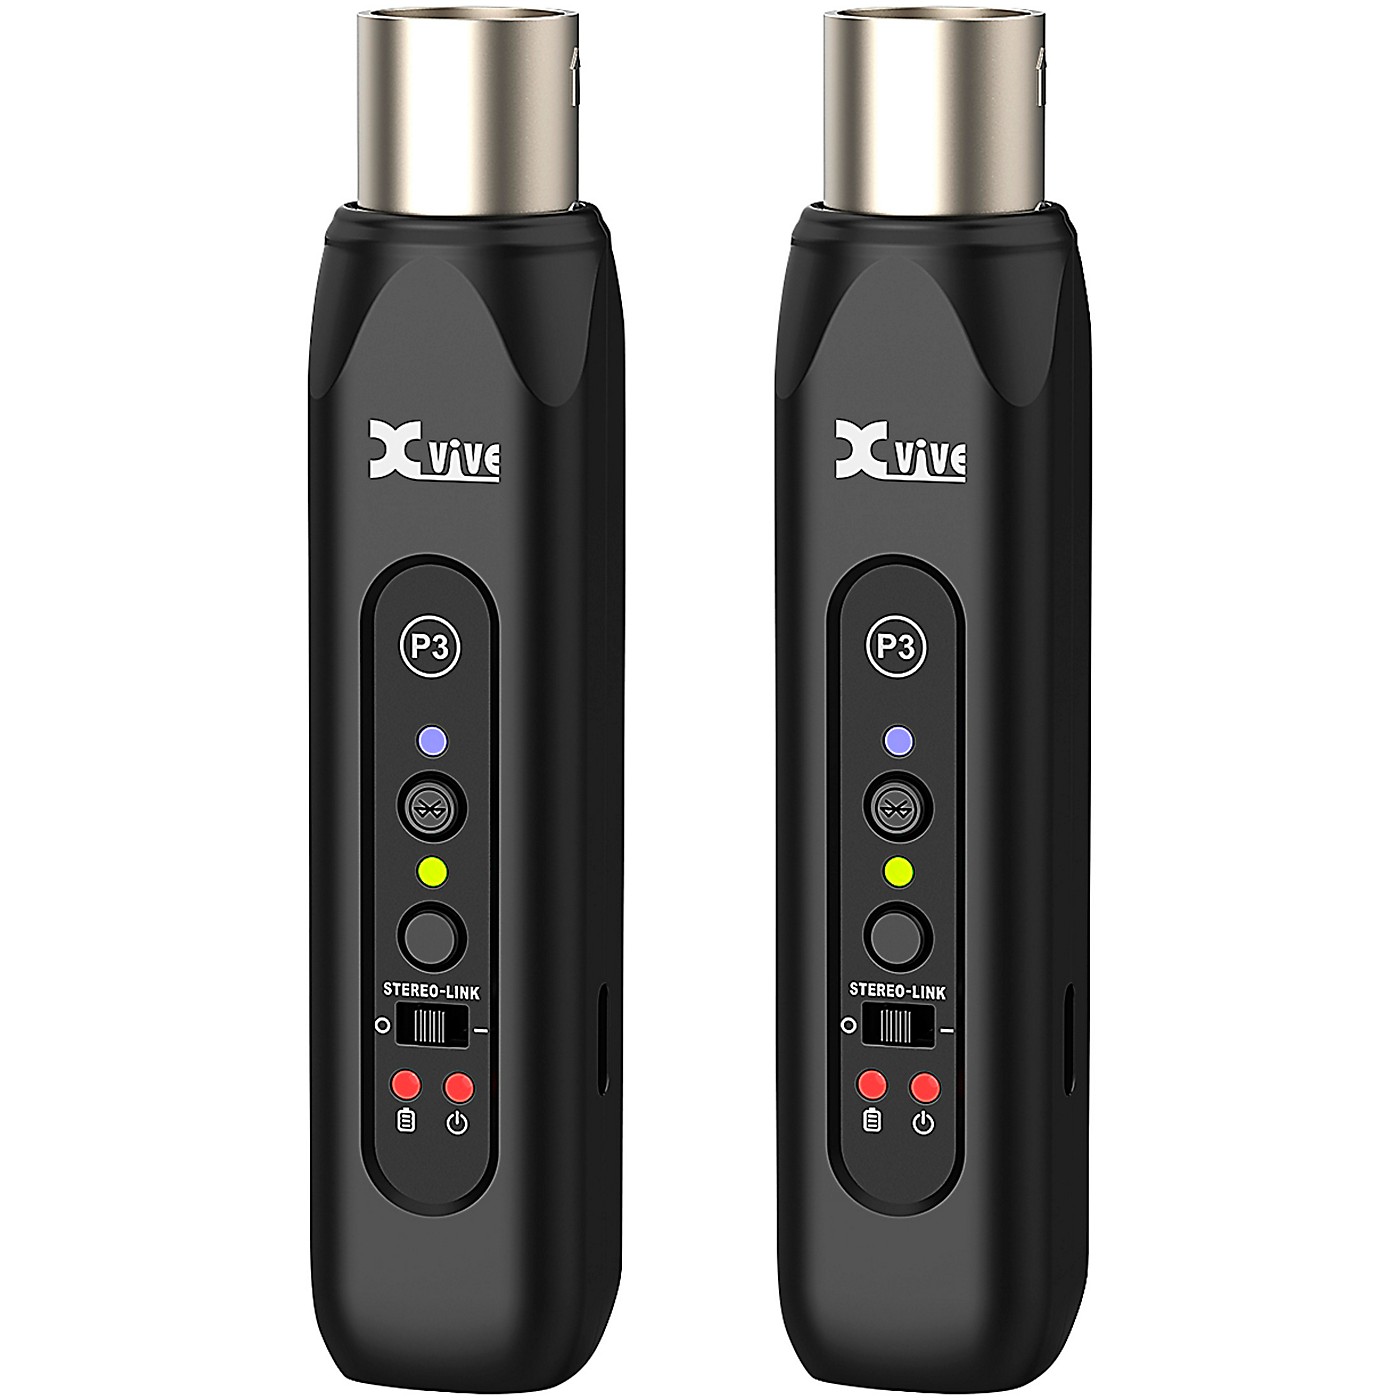 Xvive Bluetooth Audio Receiver With Two P3 Bluetooth Audio Receivers for Dual Mono or Stereo Audio thumbnail